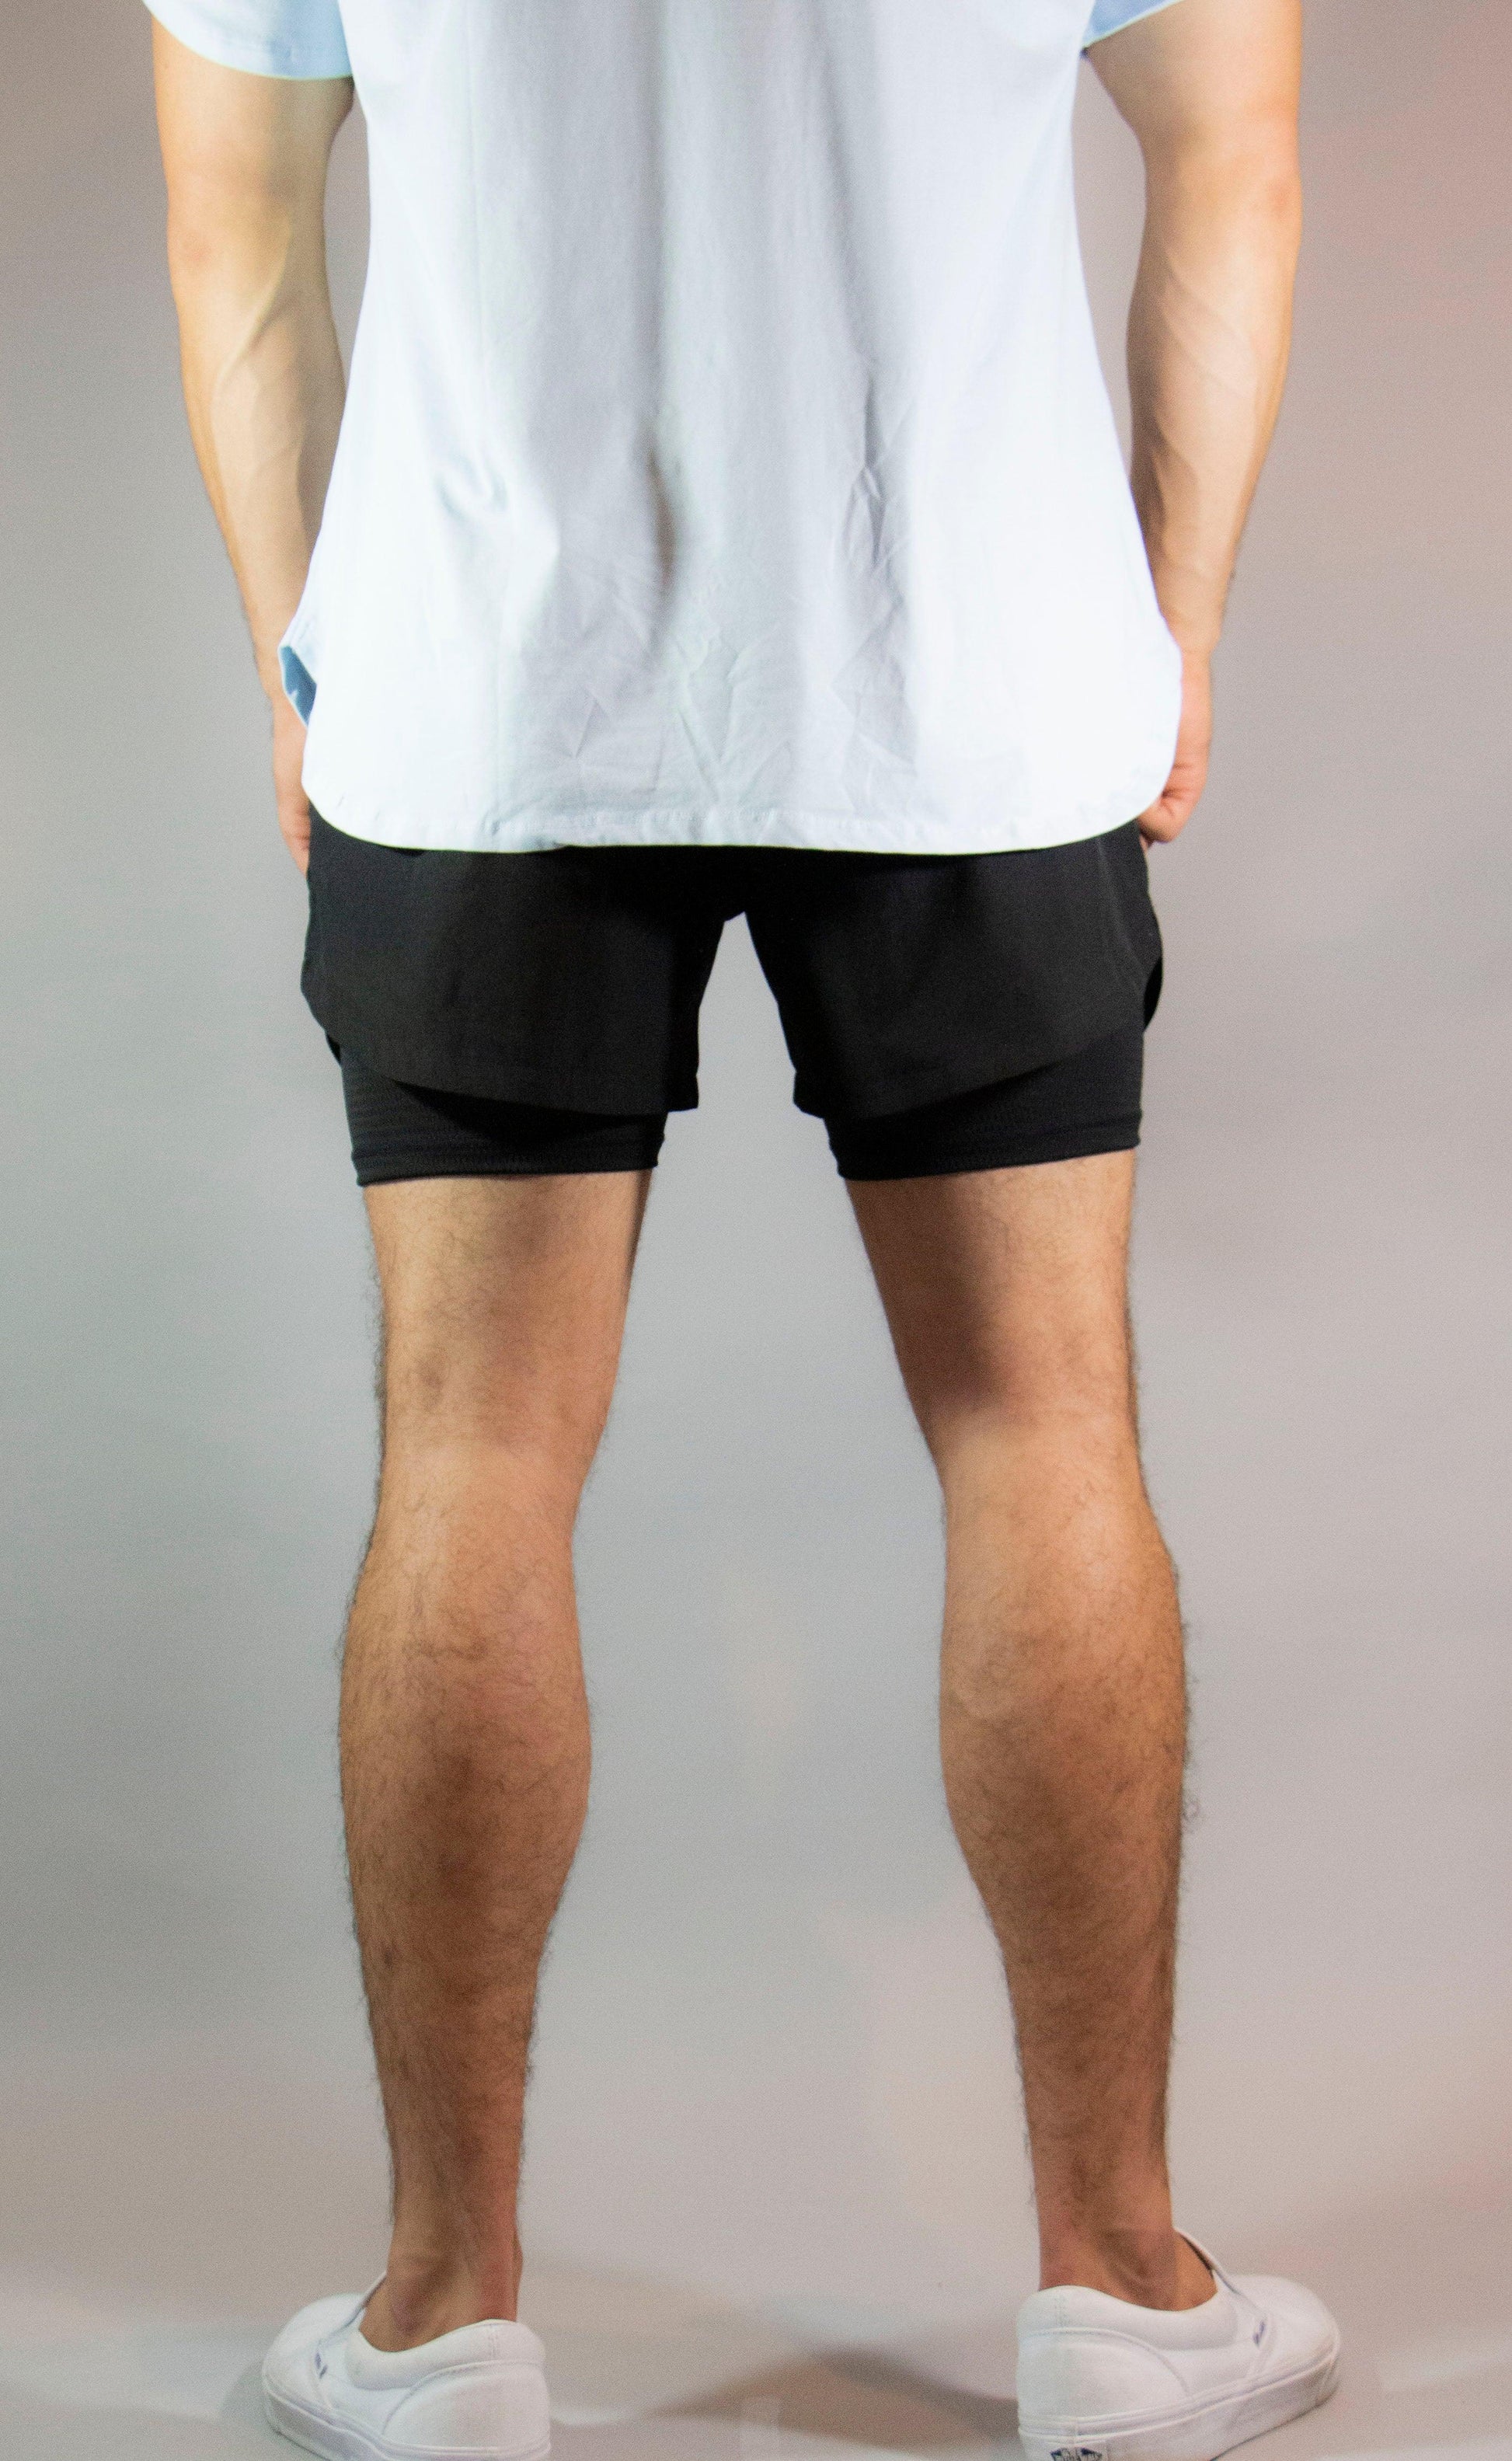 Active Shorts - Non-Branded Black / S